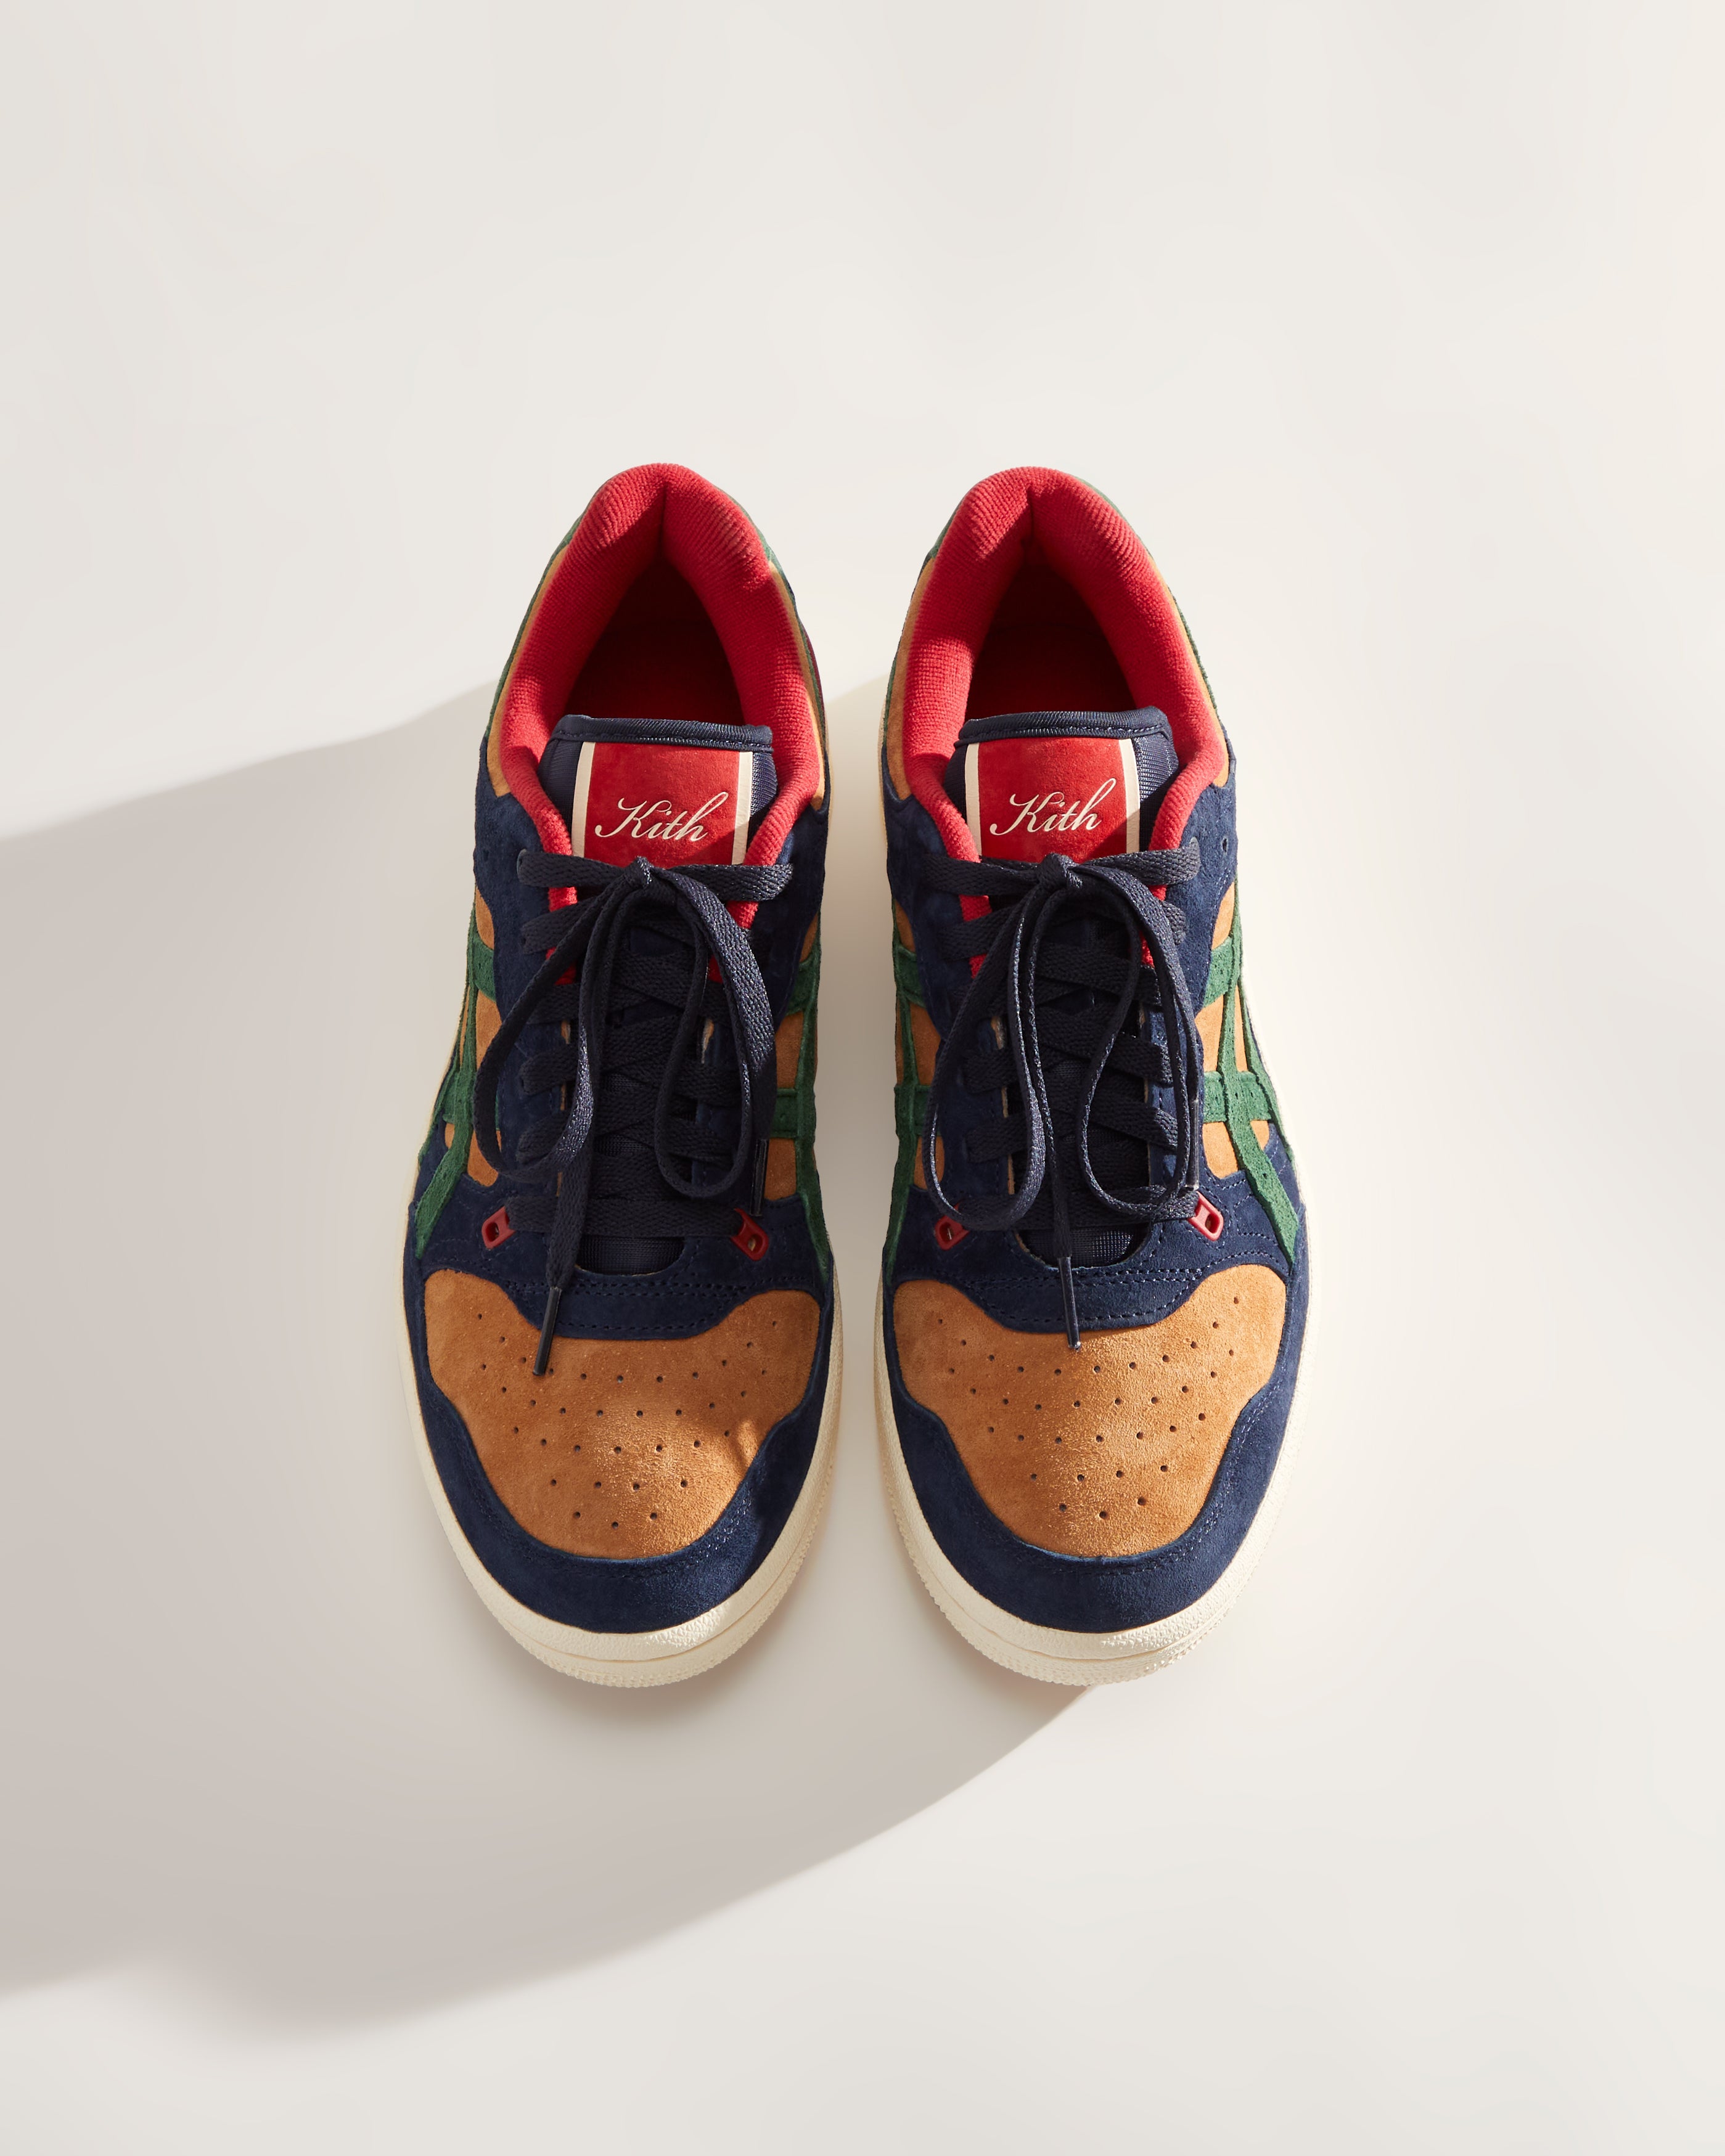 Ronnie Fieg for ASICS EX89 Outdoor – Kith